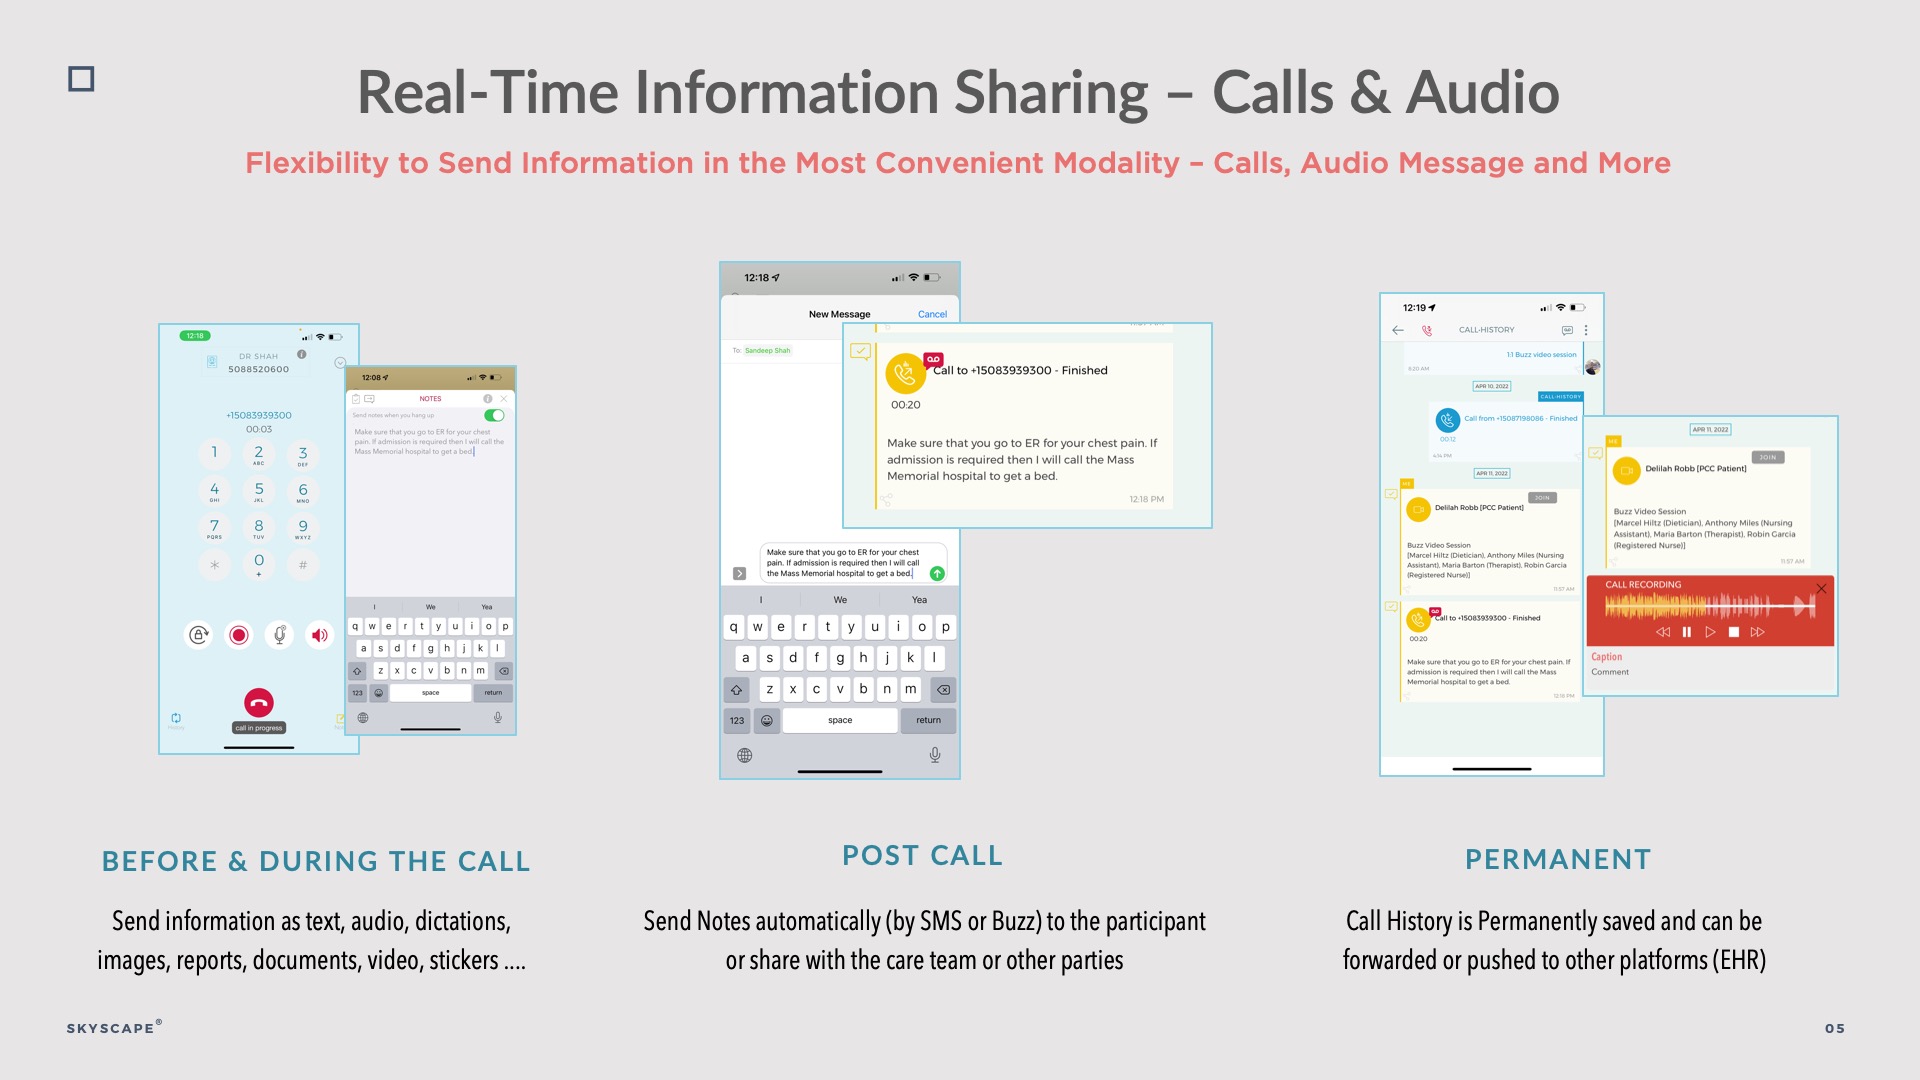 Real-Time Information Exchange - Calls & Audio with Group functionality - Efficient Routing of Faxes, Inbound Emails and more